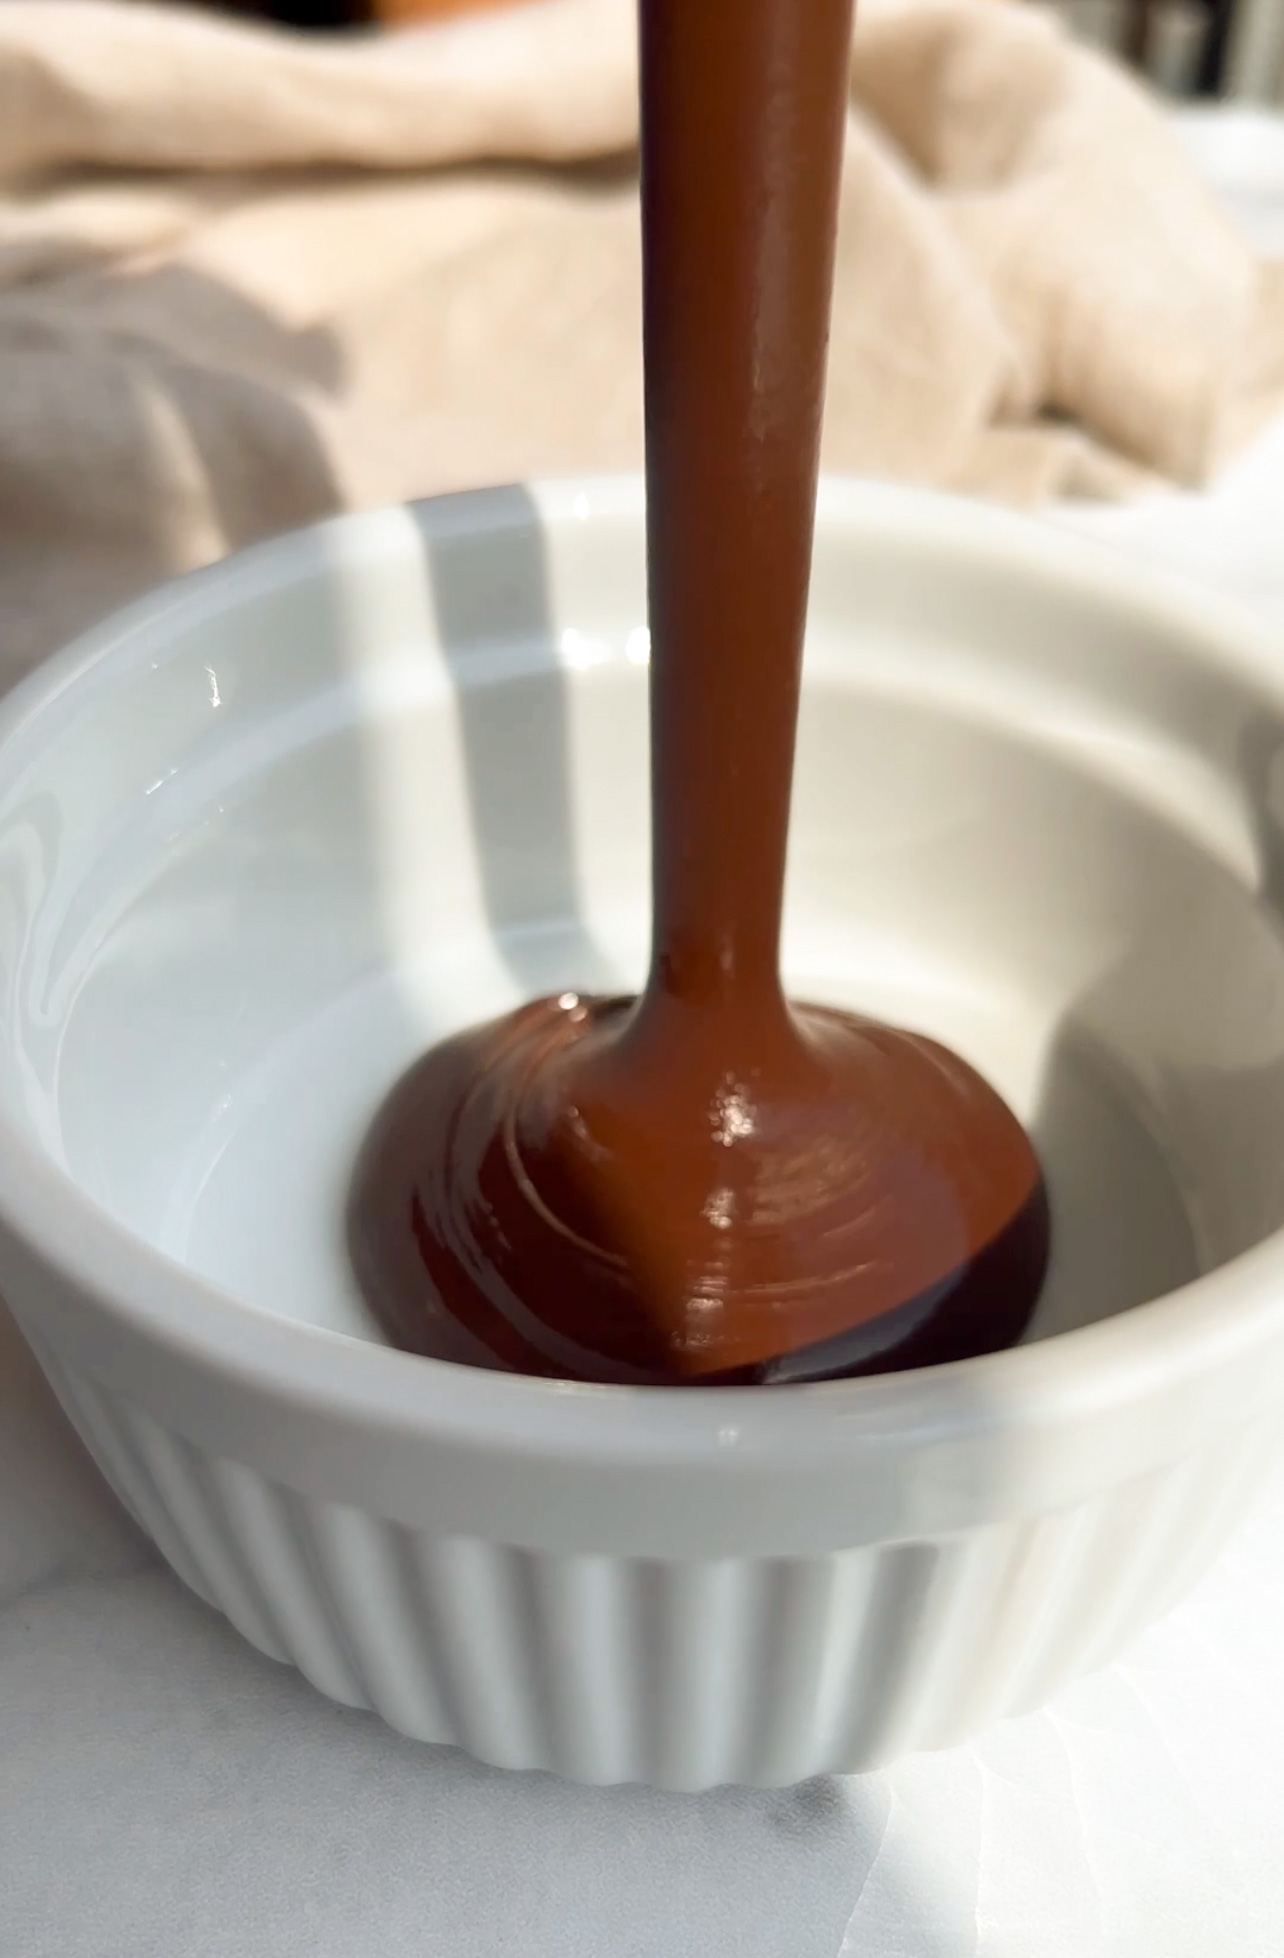 melted chocolate poured into a bowl